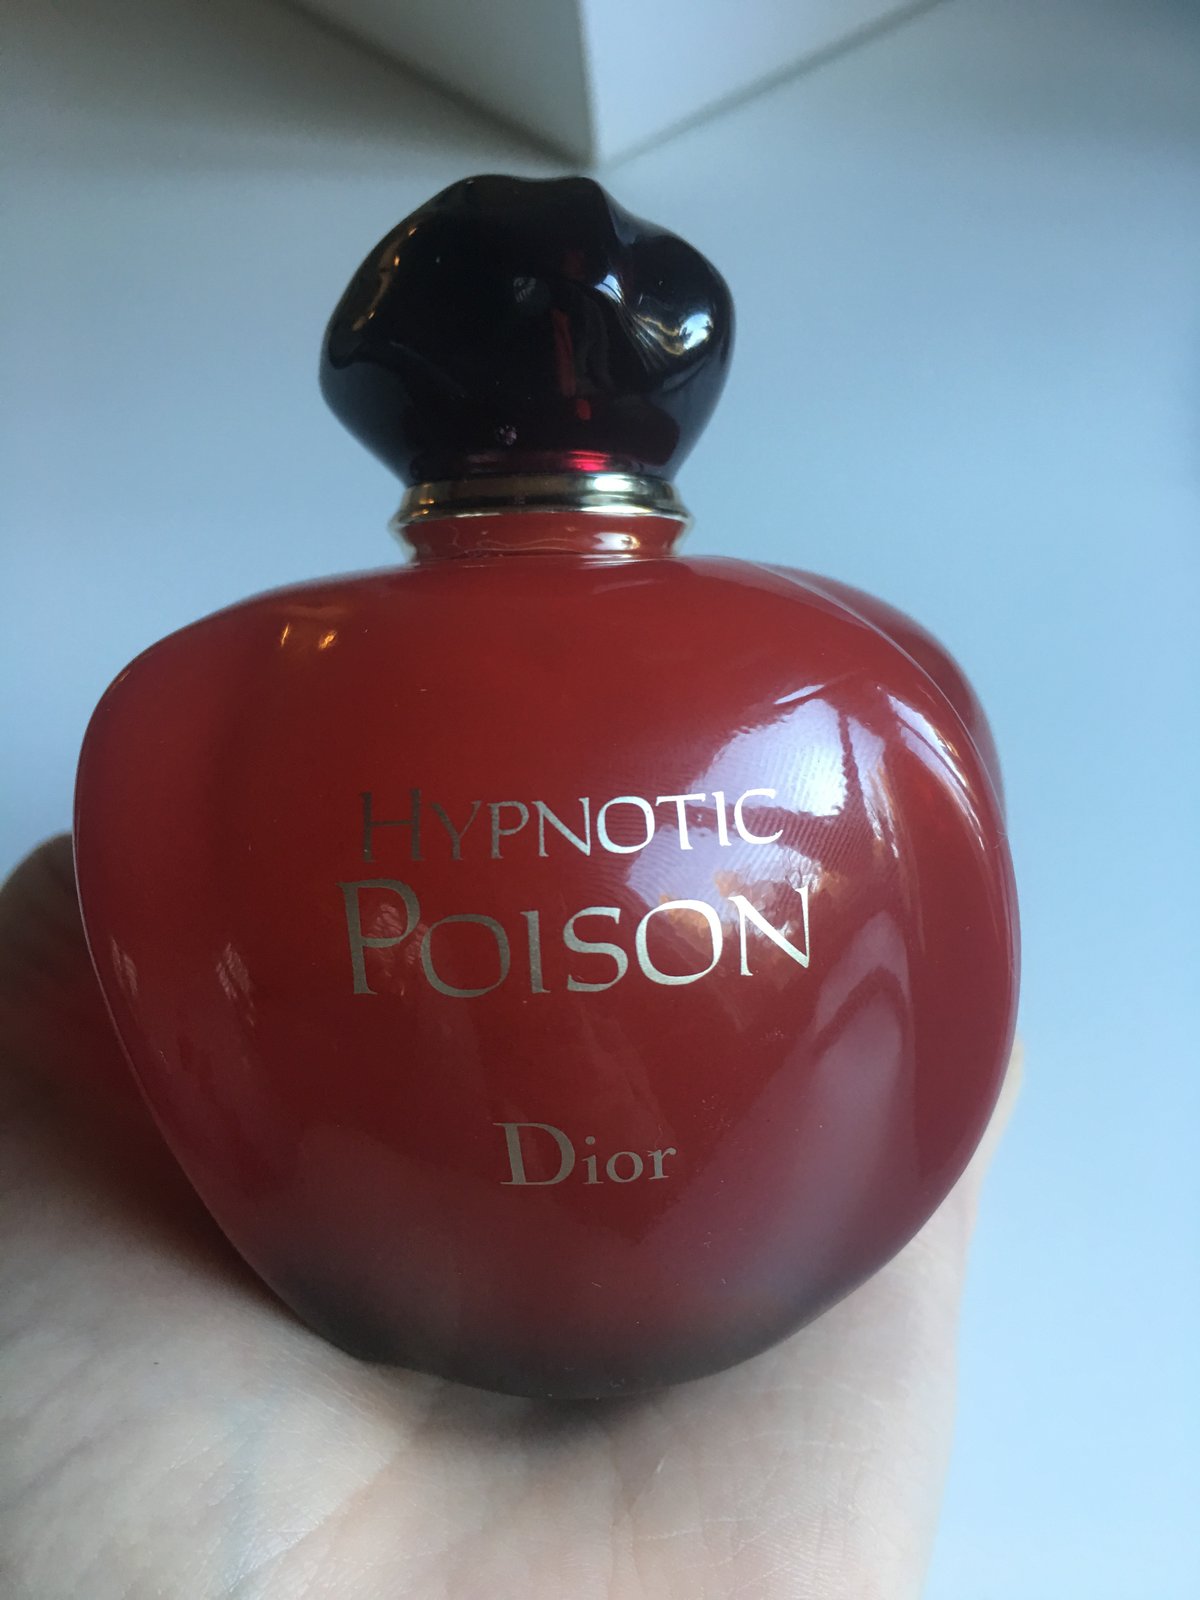 How Weak Is New Hypnotic Poison Edt Page 1 General Perfume Talk Fragrantica Club